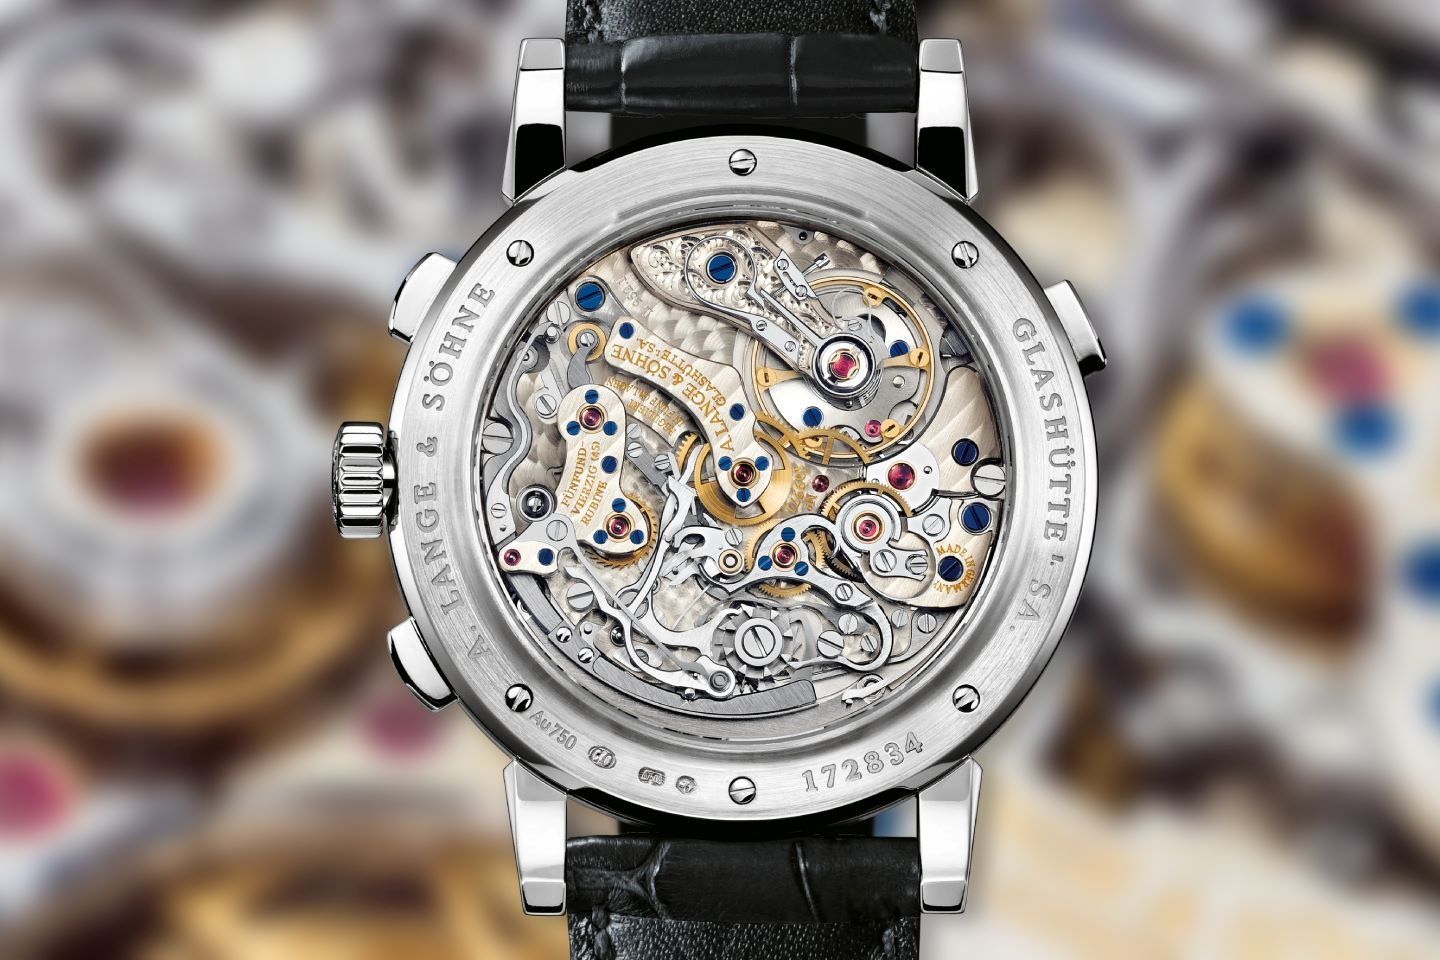 The movement features an artisanal flourish with chamfering, interior angles and hand engraving